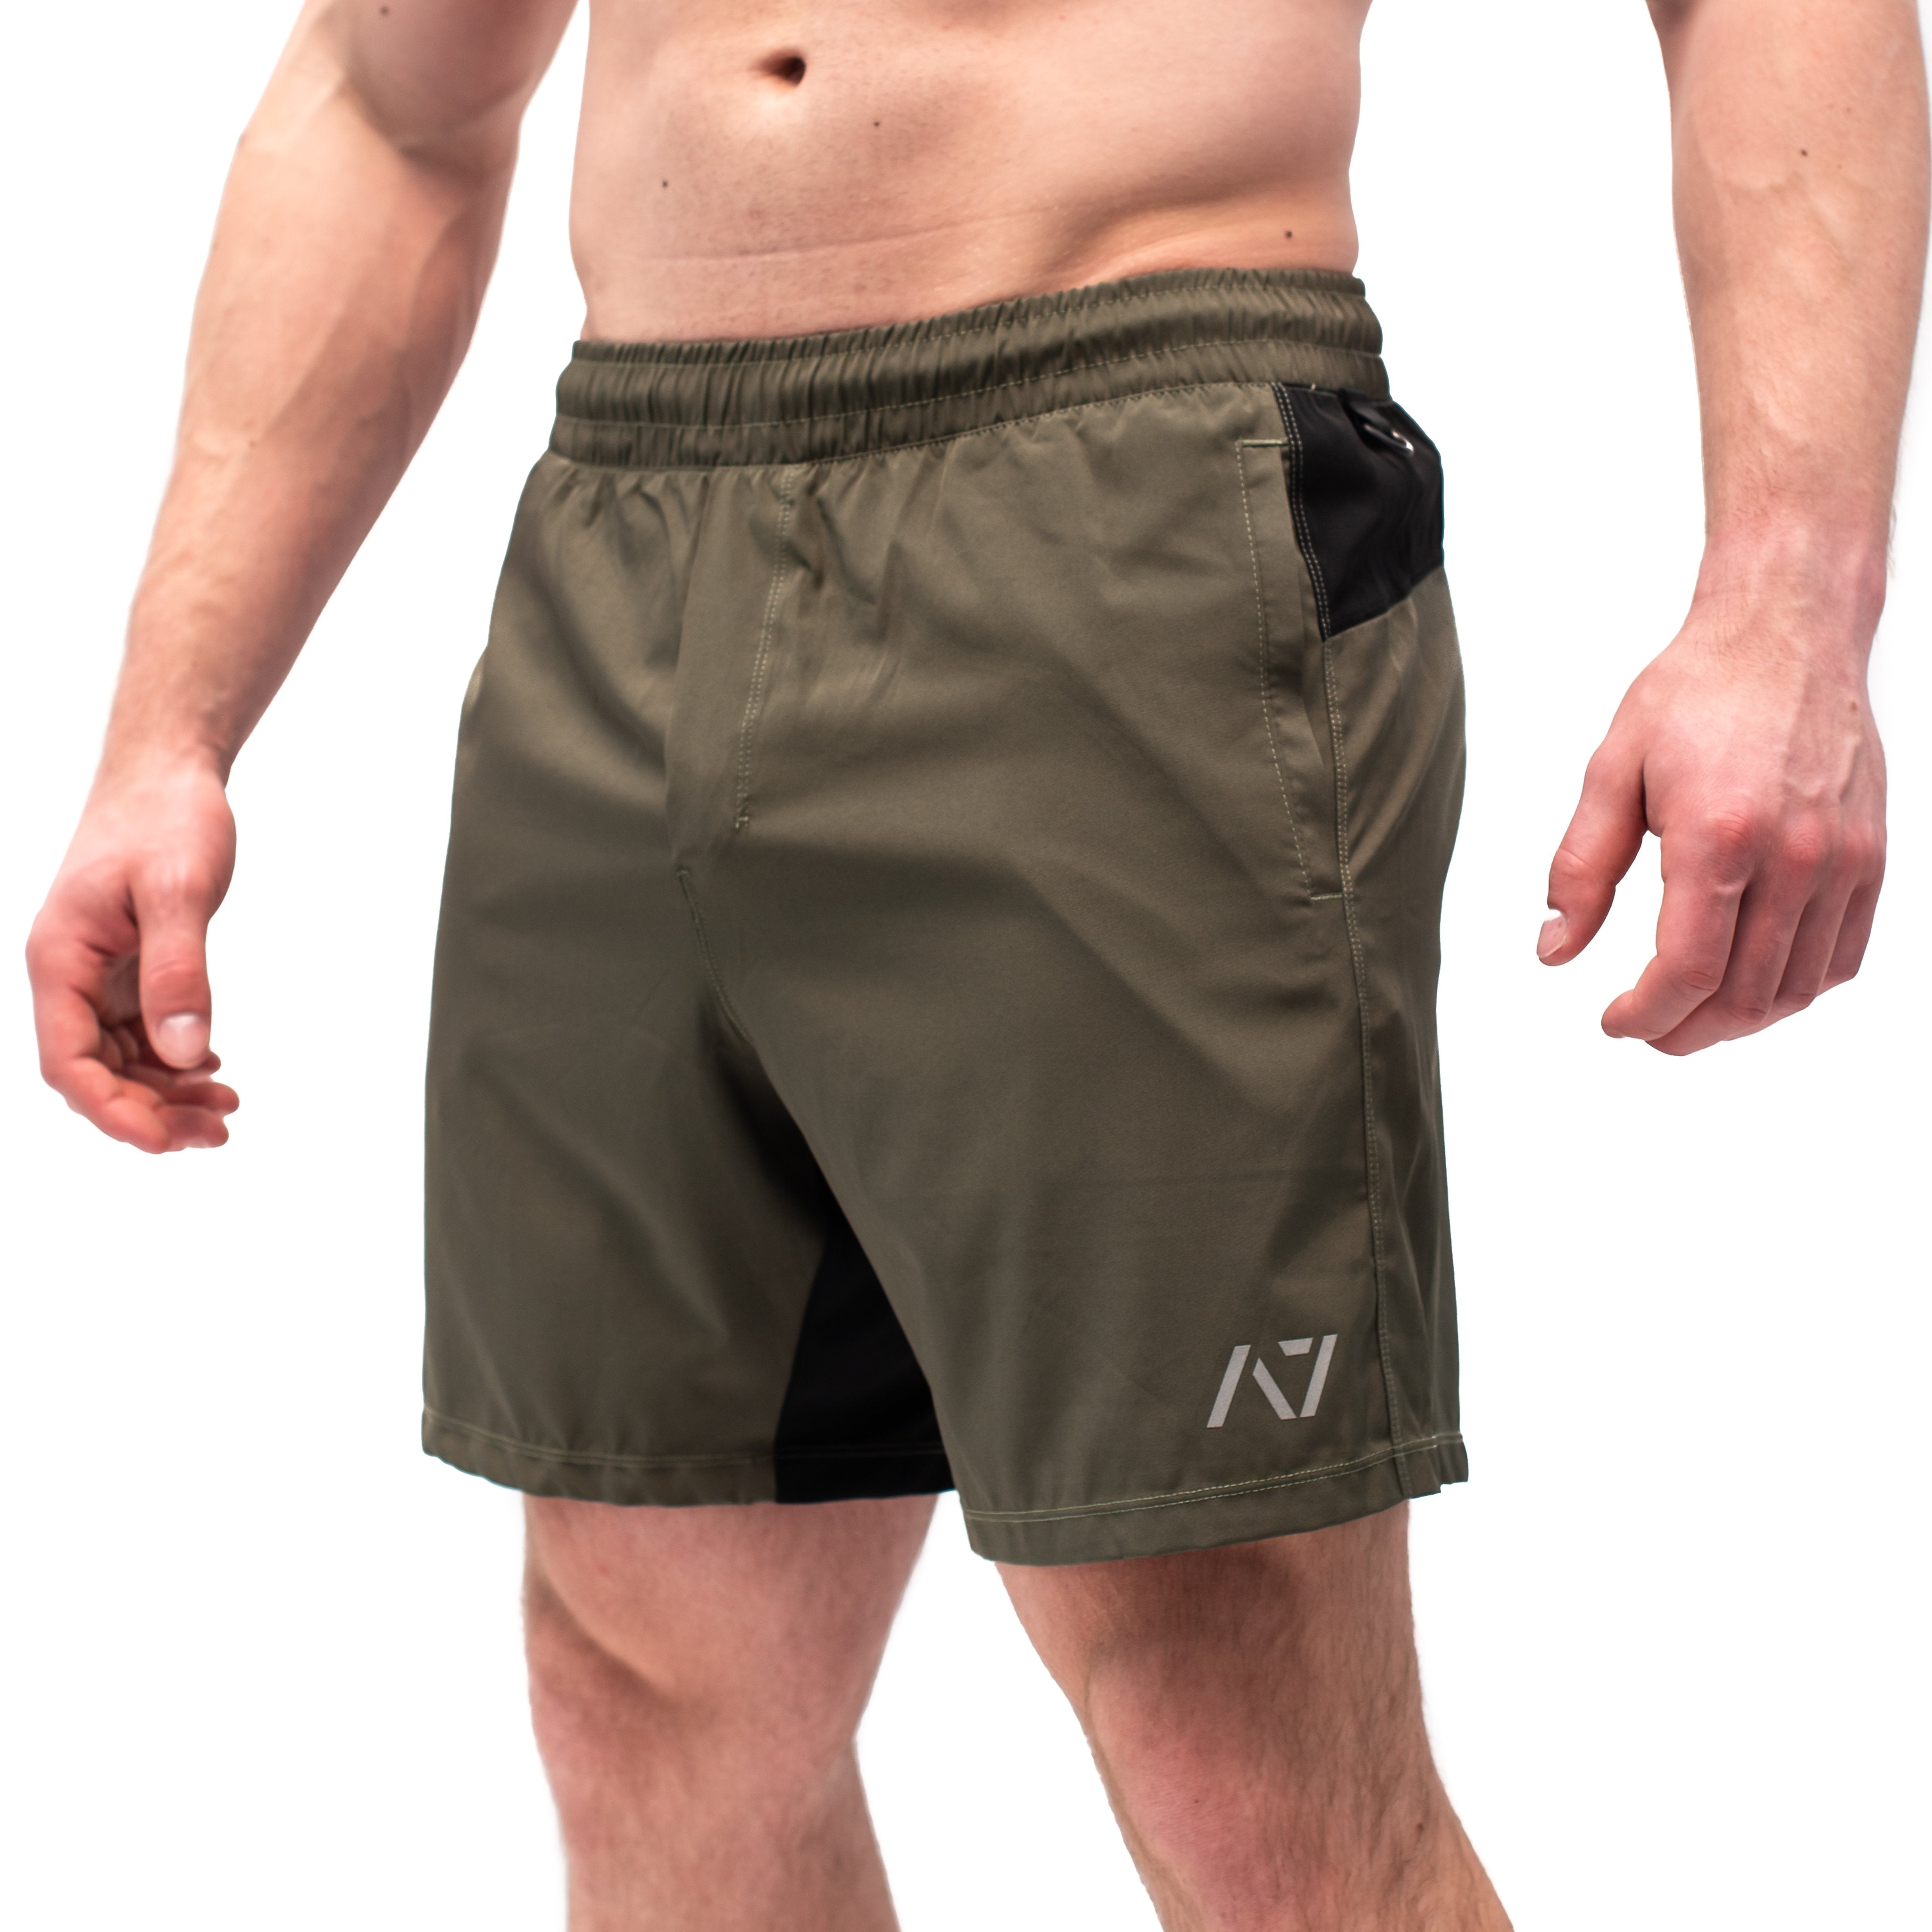 Have you ever squatted in shorts and realised that they may be too tight on you at the bottom of a squat? We have solved this problem with A7 Centre-stretch Squat Shorts. The shorts are made with stretchy fabric in between legs so you are never constricted during your squat.